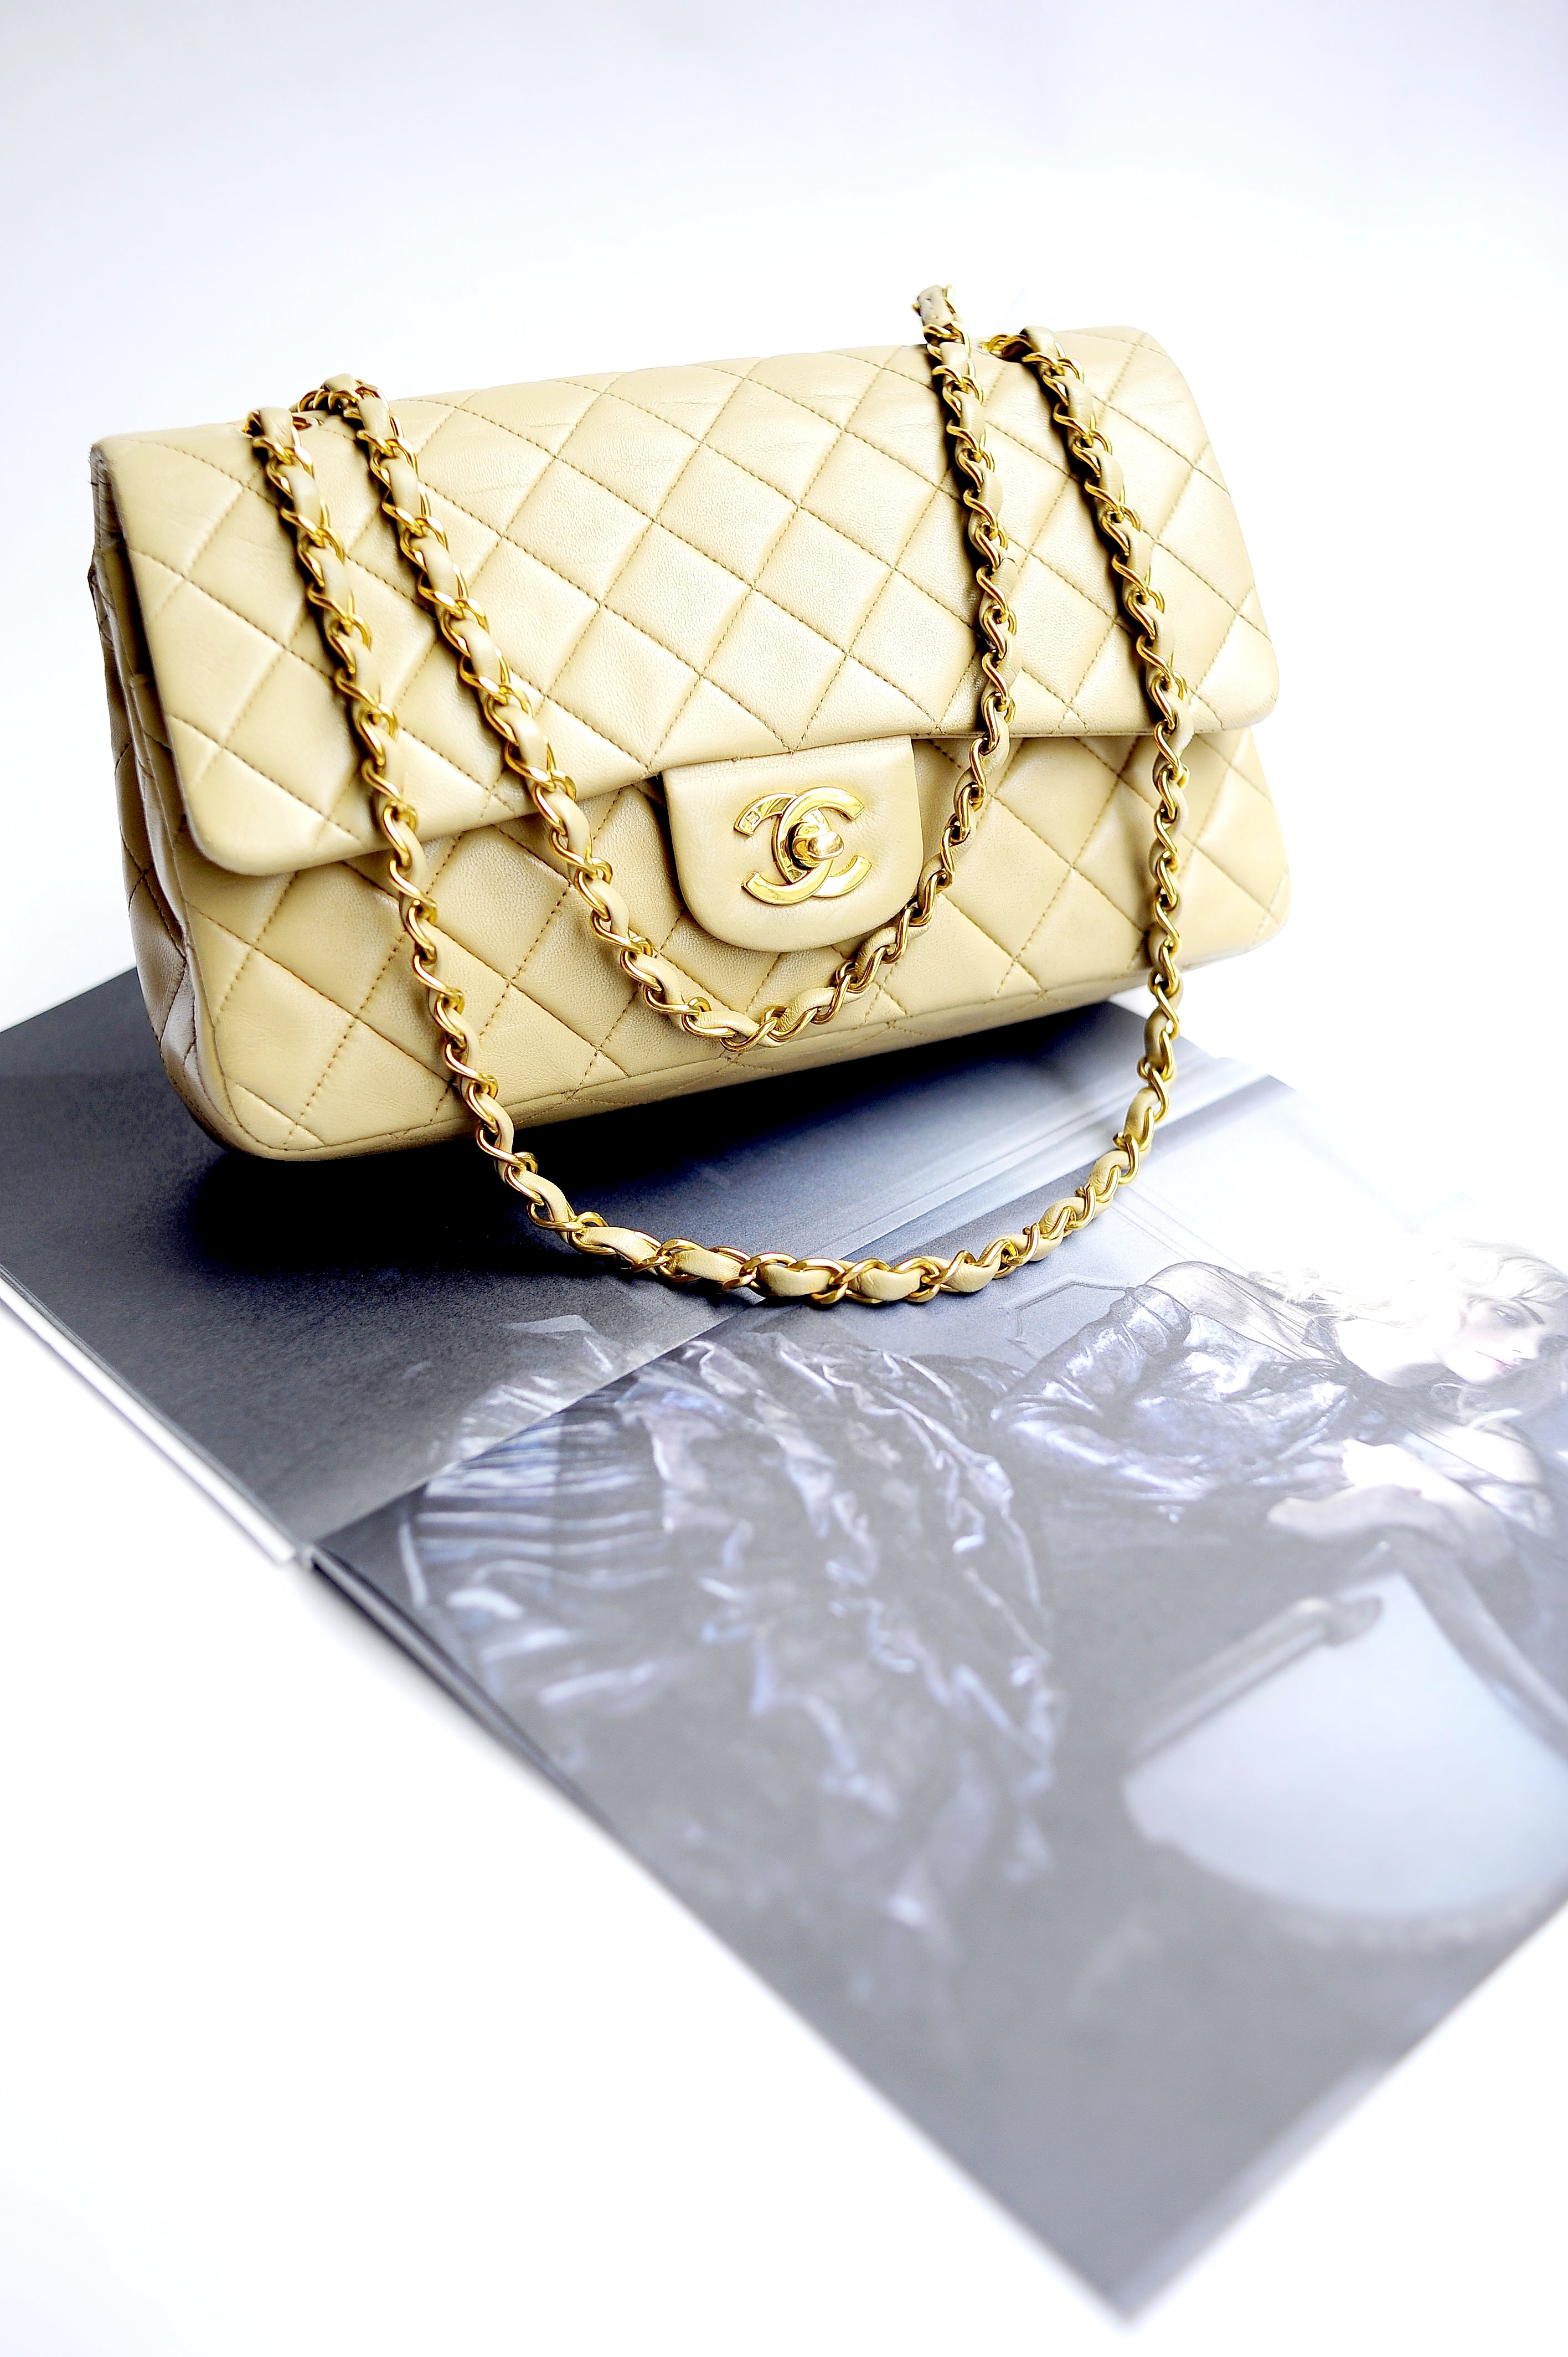 Its Official Huge Price Increase For All Chanel Handbags  Haute Edition